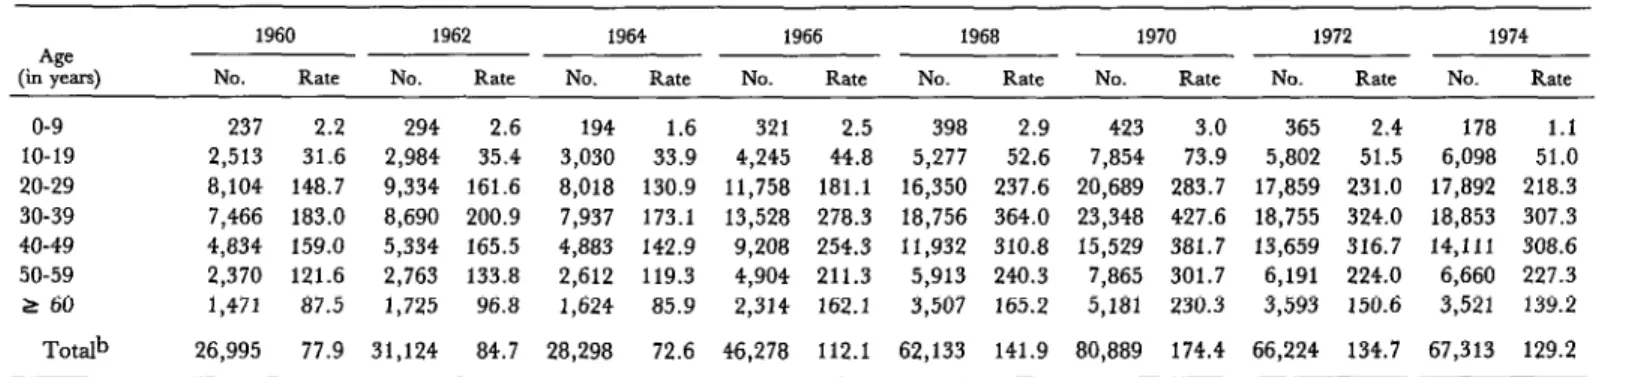 Table  1.  Male  admissions  to  psychiatric  facilities  by  age  group,  1960-1974.  The  data  shown  give  the  number  of  first  admissions  by  age  group  and  the  age-specific  first  admission  rate  per  100,000  population  for  psychiatric  f